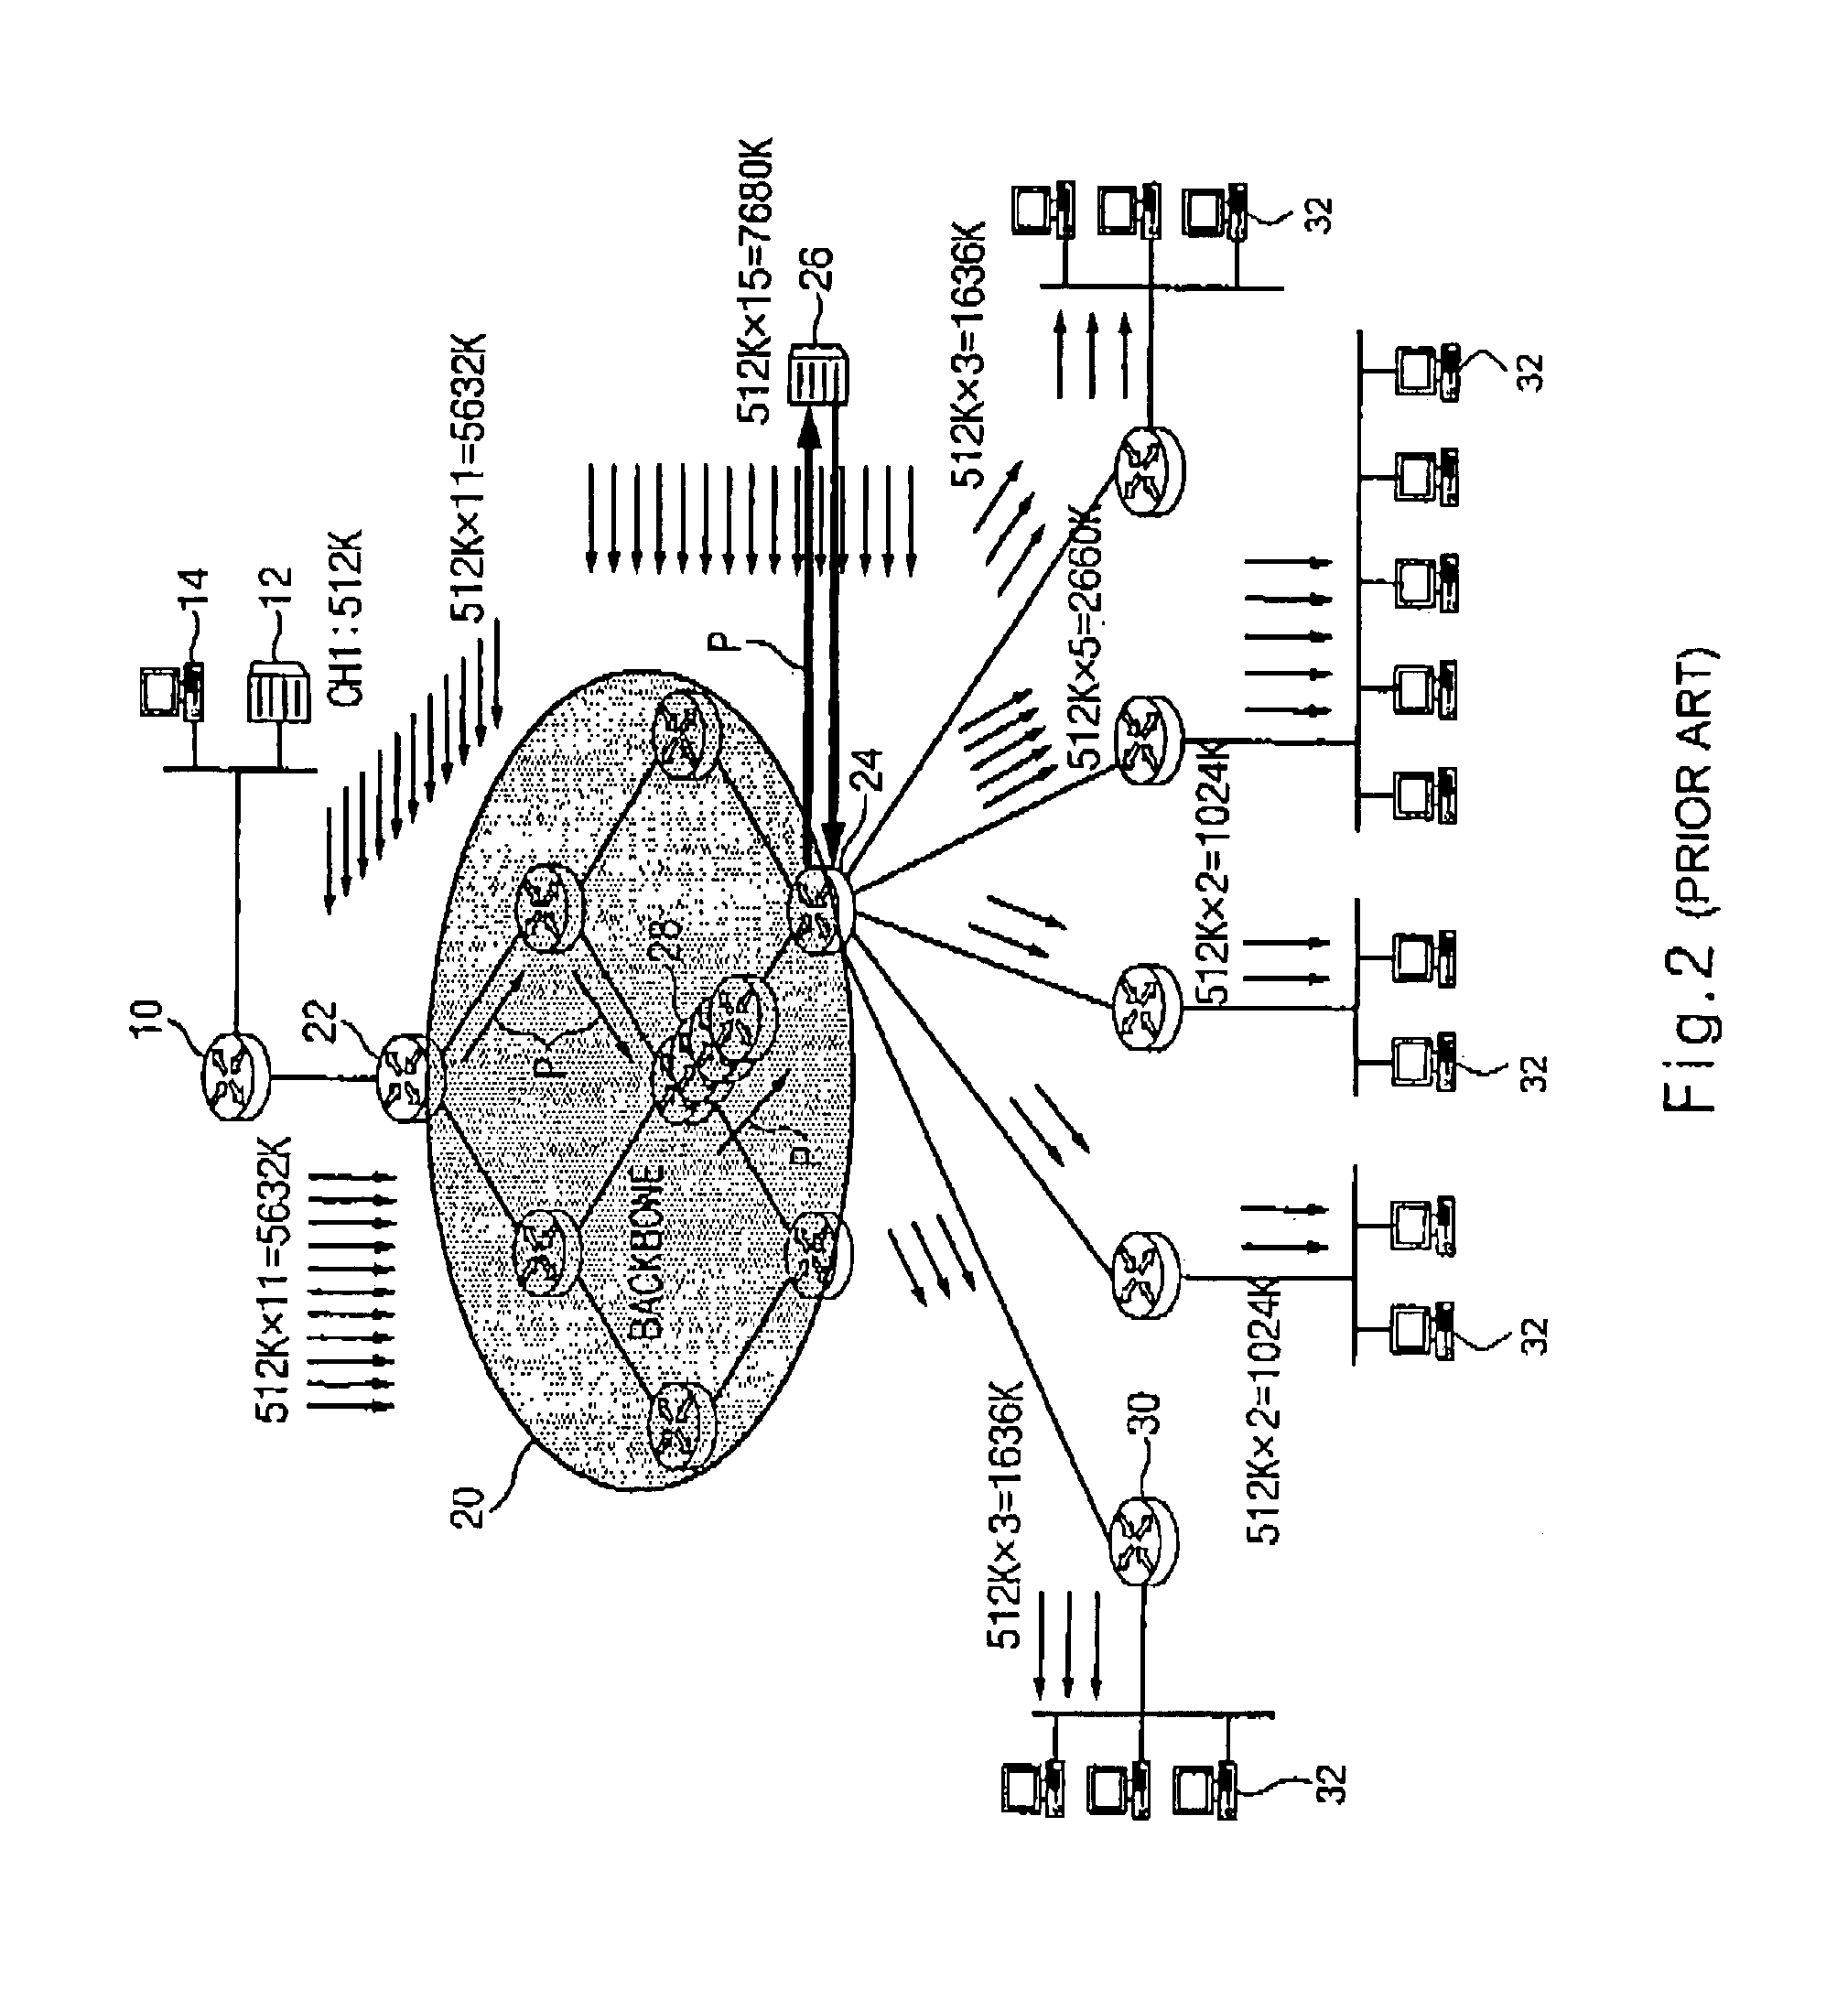 Satellite IP multicasting system and method